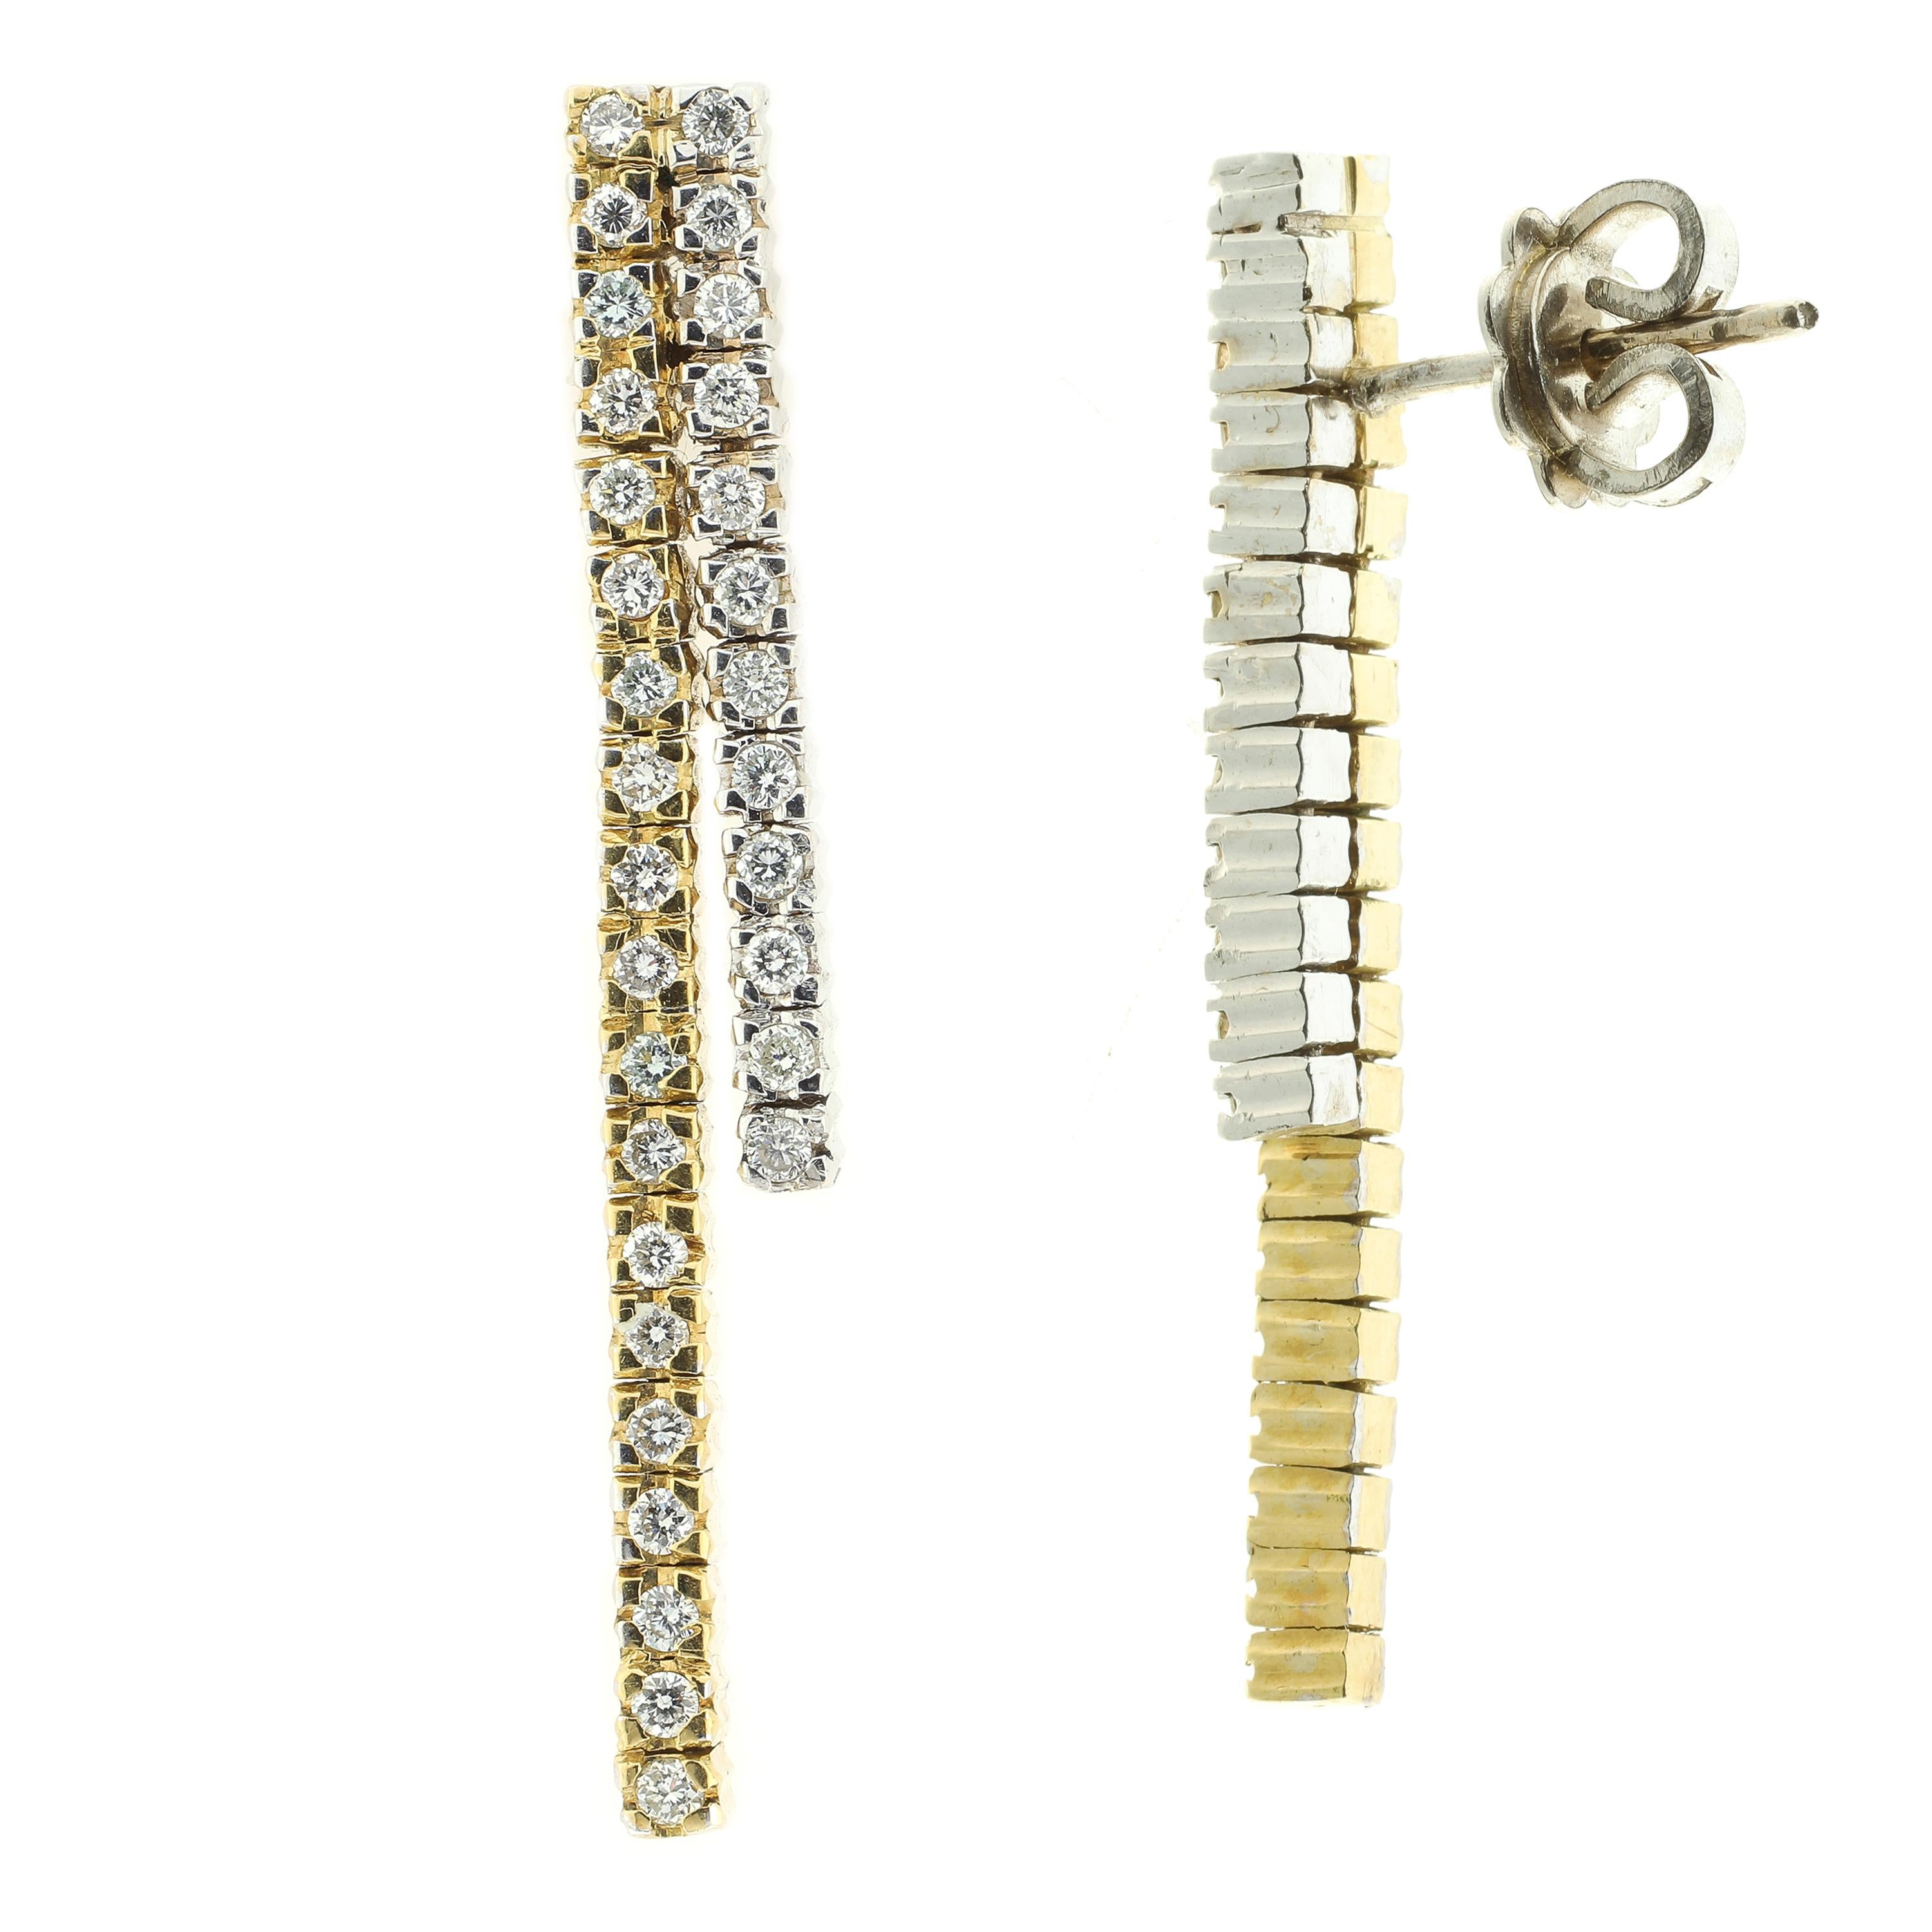 These modern drop earrings are masterfully handmade from a luxurious combination of white and yellow 18-karat gold which partner perfectly to set off two rows of gorgeous white diamonds.  

These earrings have post backs with butterfly clips and